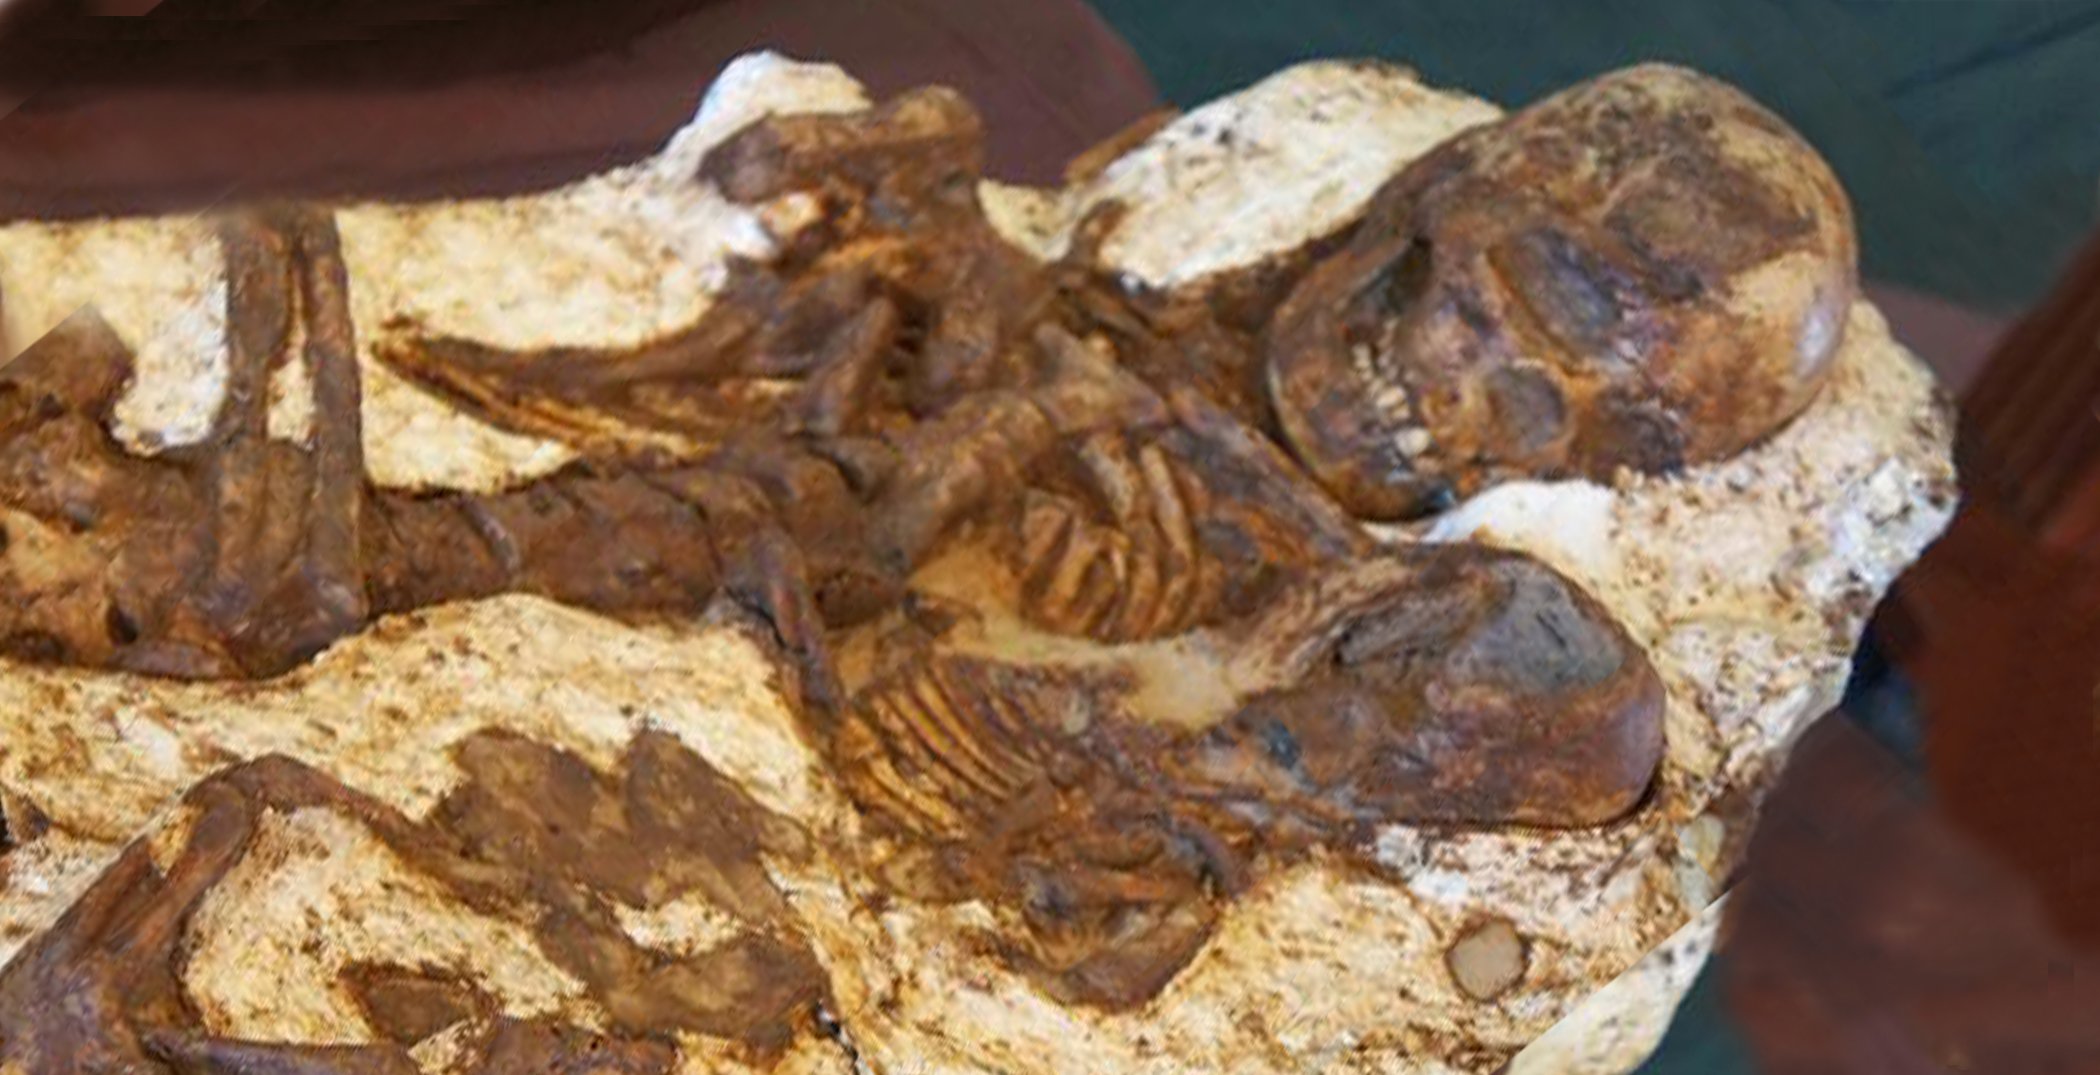 Taiwan finds 4,800-year-old fossil of mother cradling baby